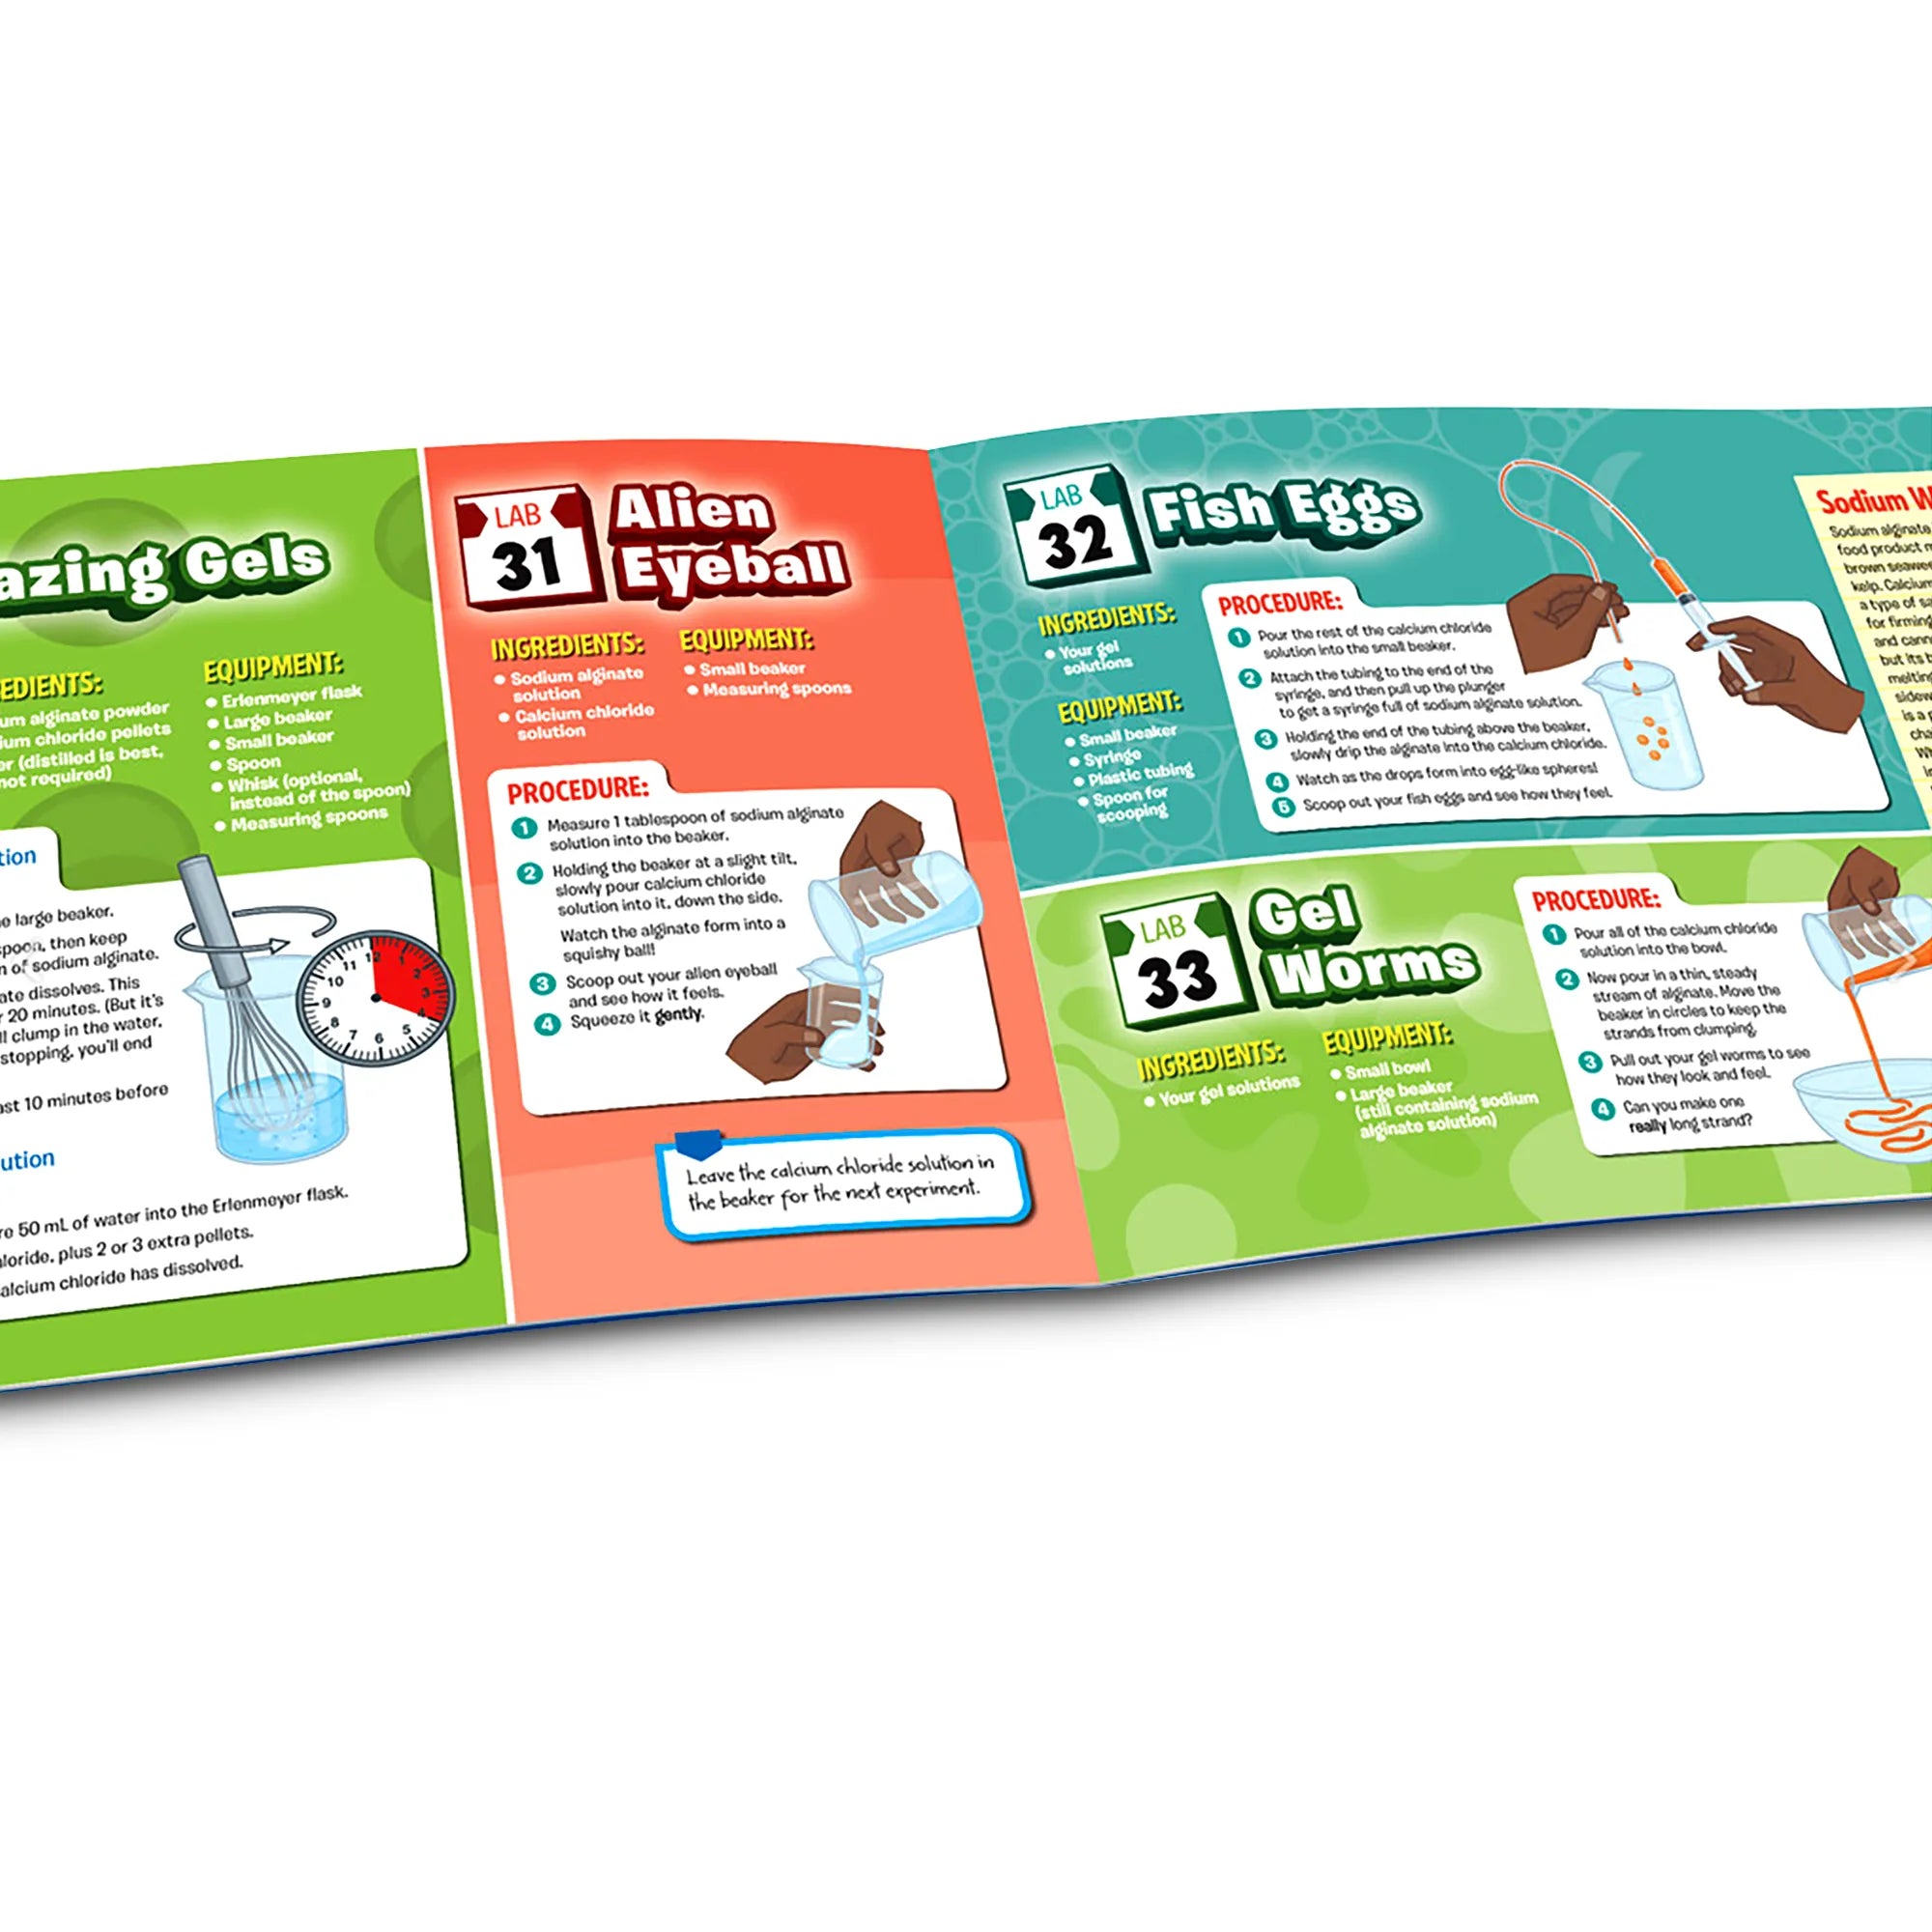 SmartLab Kitchen Science Lab - 40 Activities to Amaze & Astound! - Age 8+ - Brown's Hobby & Game